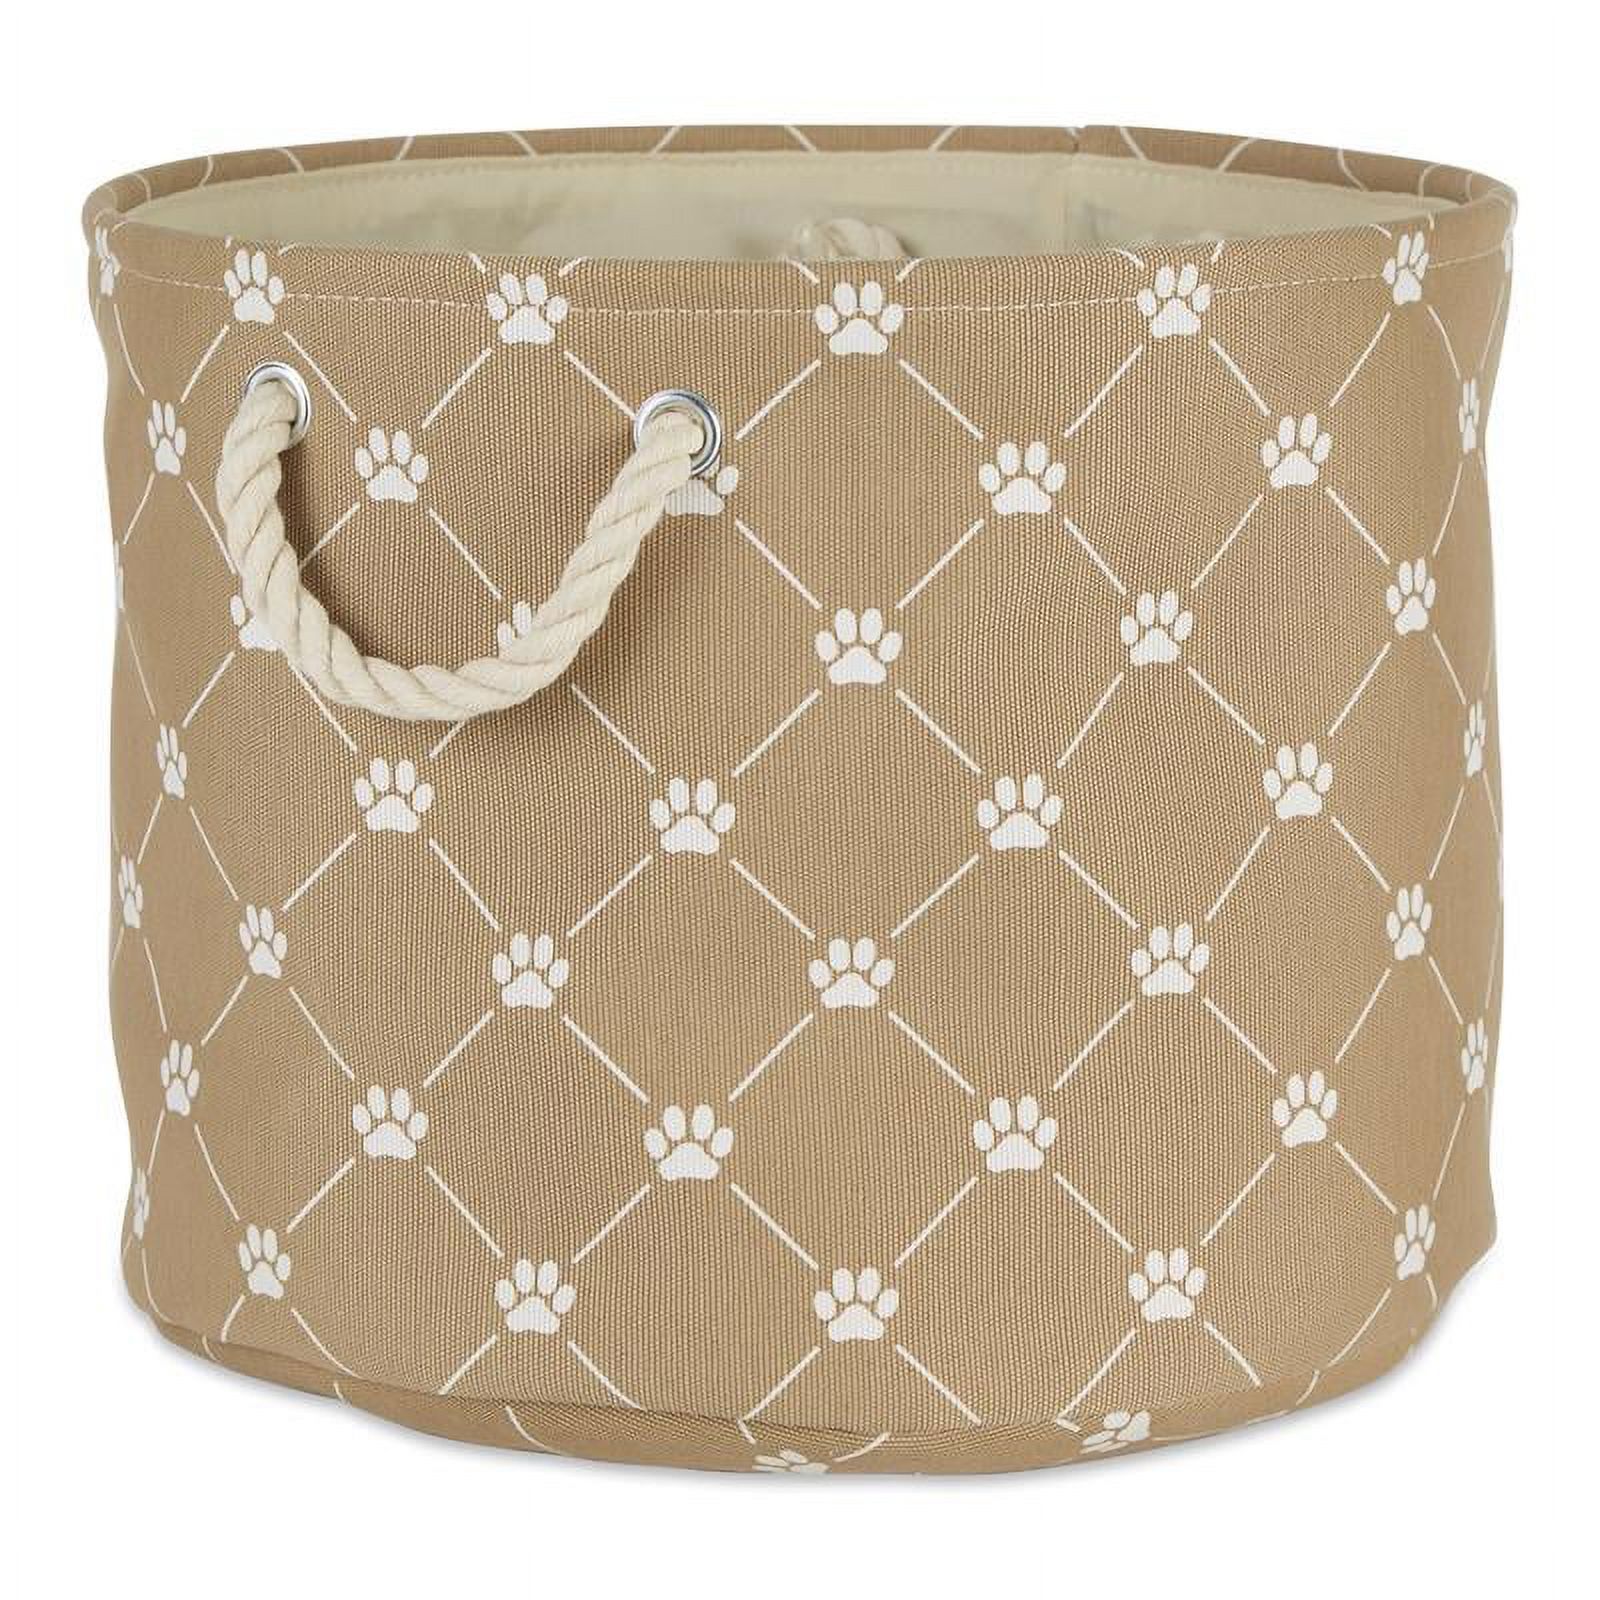 Picture of Design Imports CAMZ14244 Polyester Trellis Paw Round Pet Bin, Taupe - Small